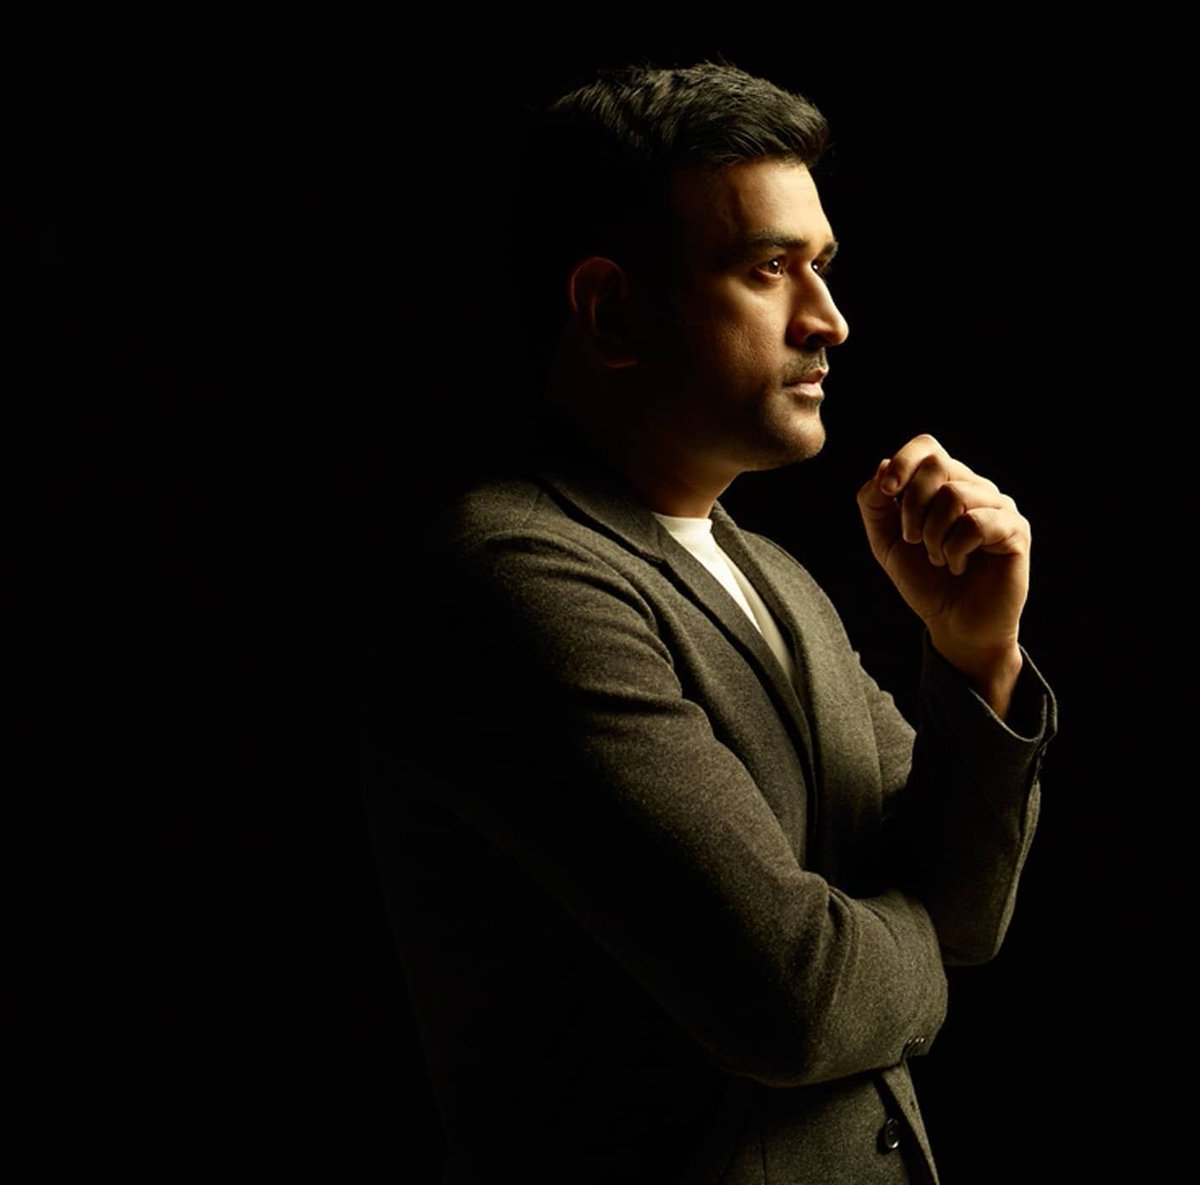 MS Dhoni Production House announces its first film in Tamil